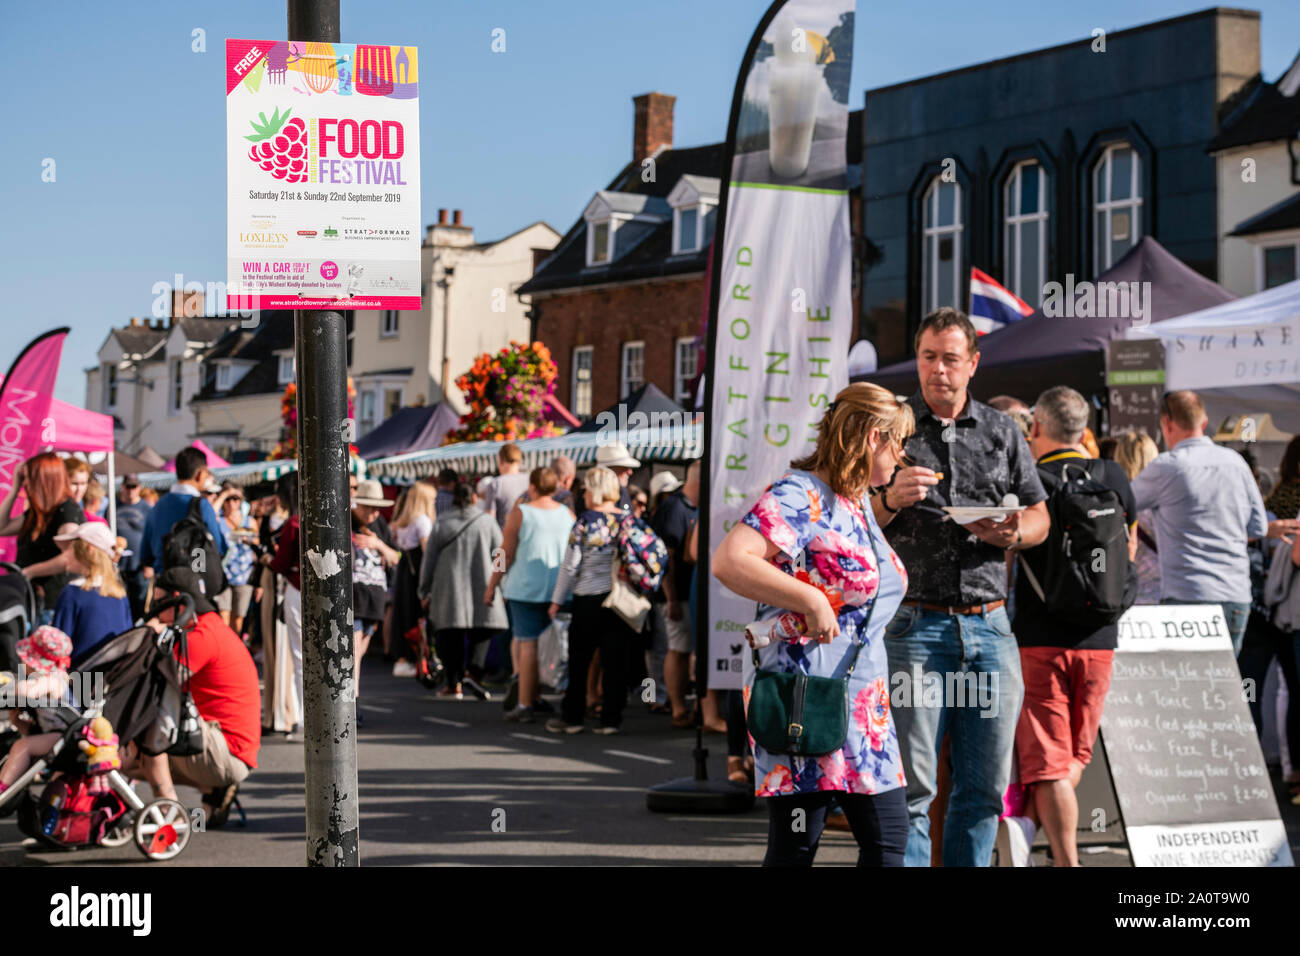 People at the Stratford upon Avon food festival, England, UK. Tourists buying food from stalls in the street. Stock Photo